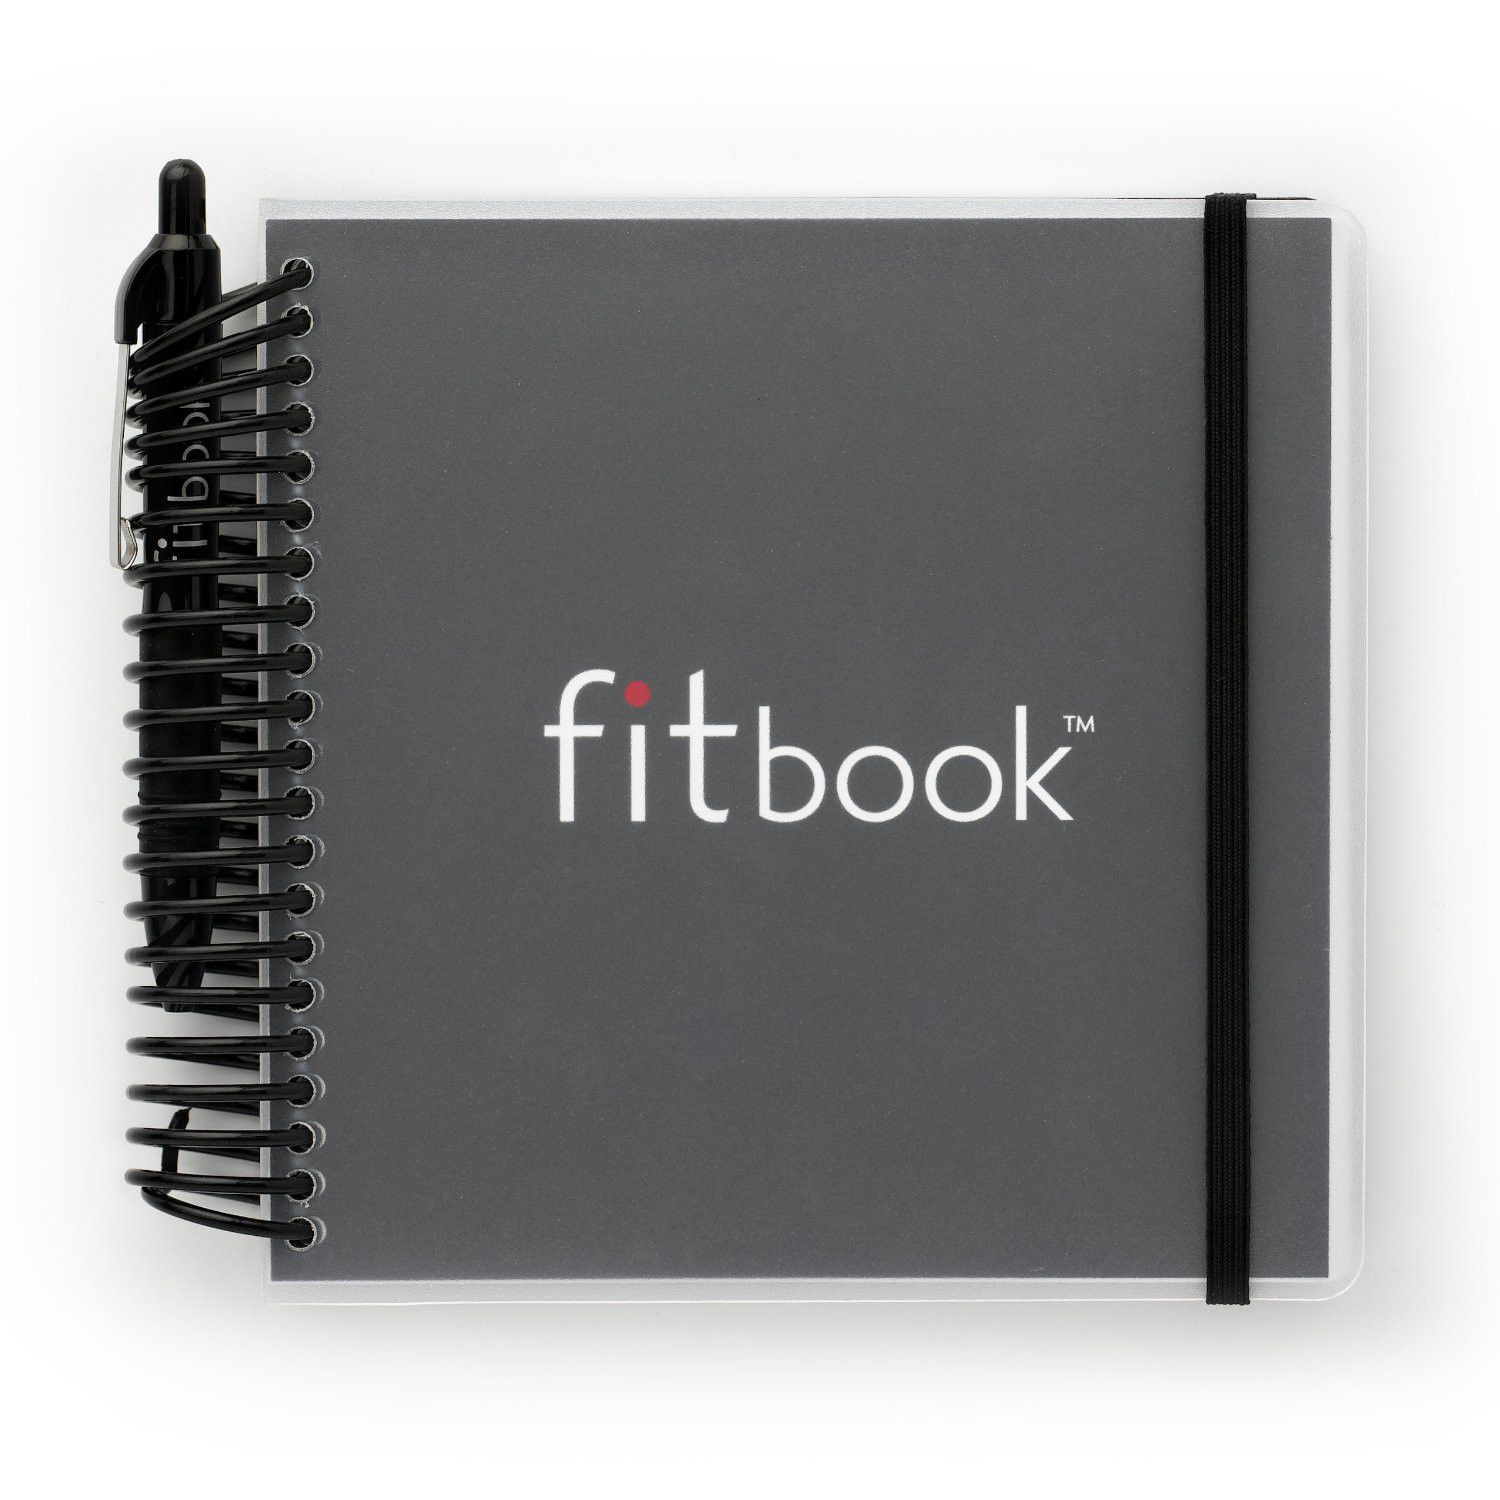 fitbook®: fitness tracker and food journal -   fitbook fitness Journal